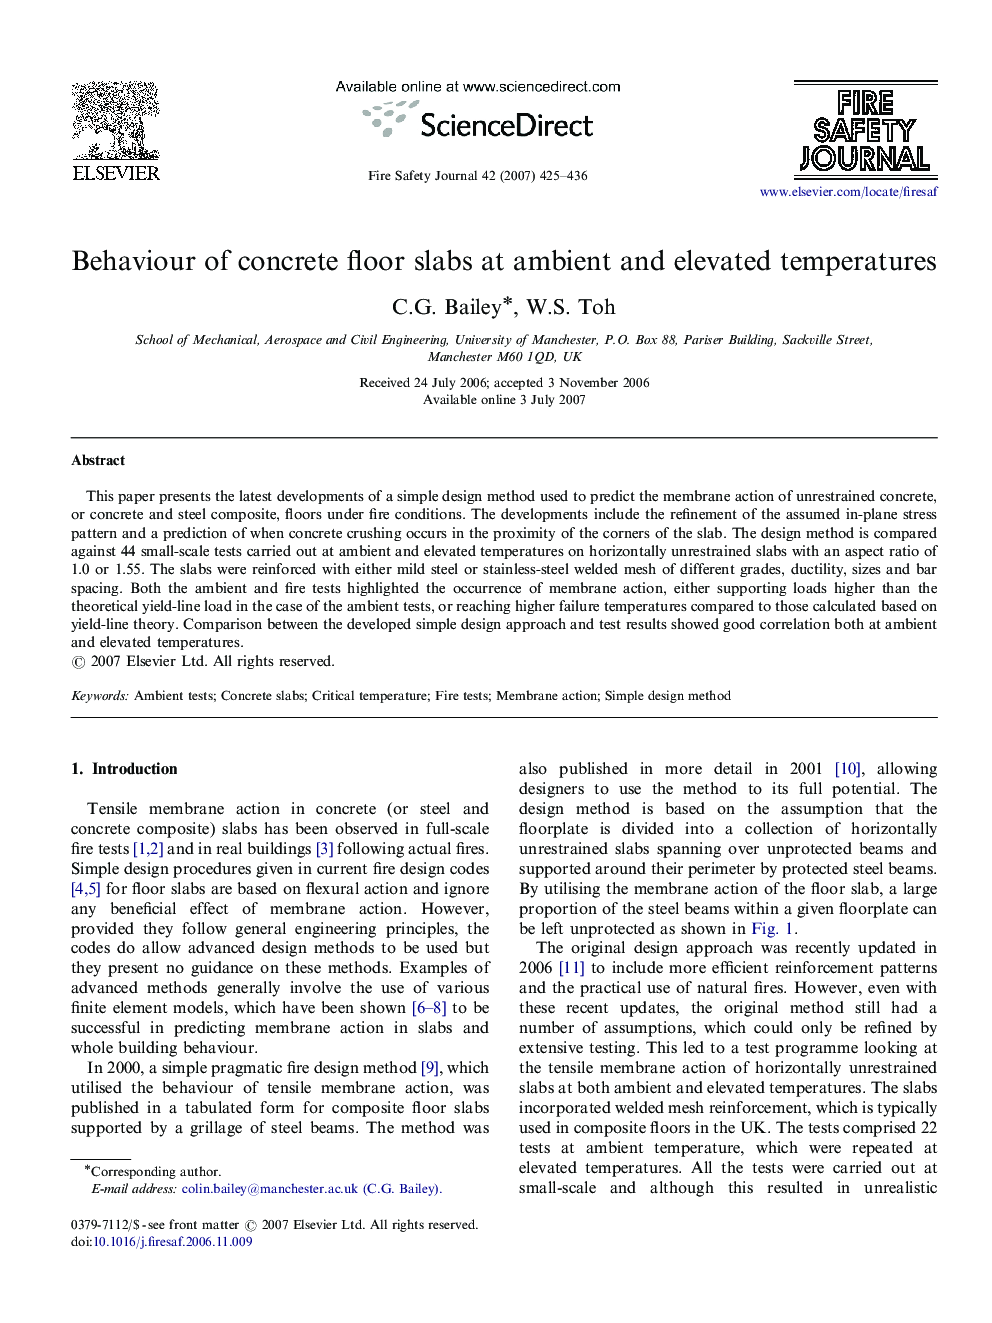 Behaviour of concrete floor slabs at ambient and elevated temperatures